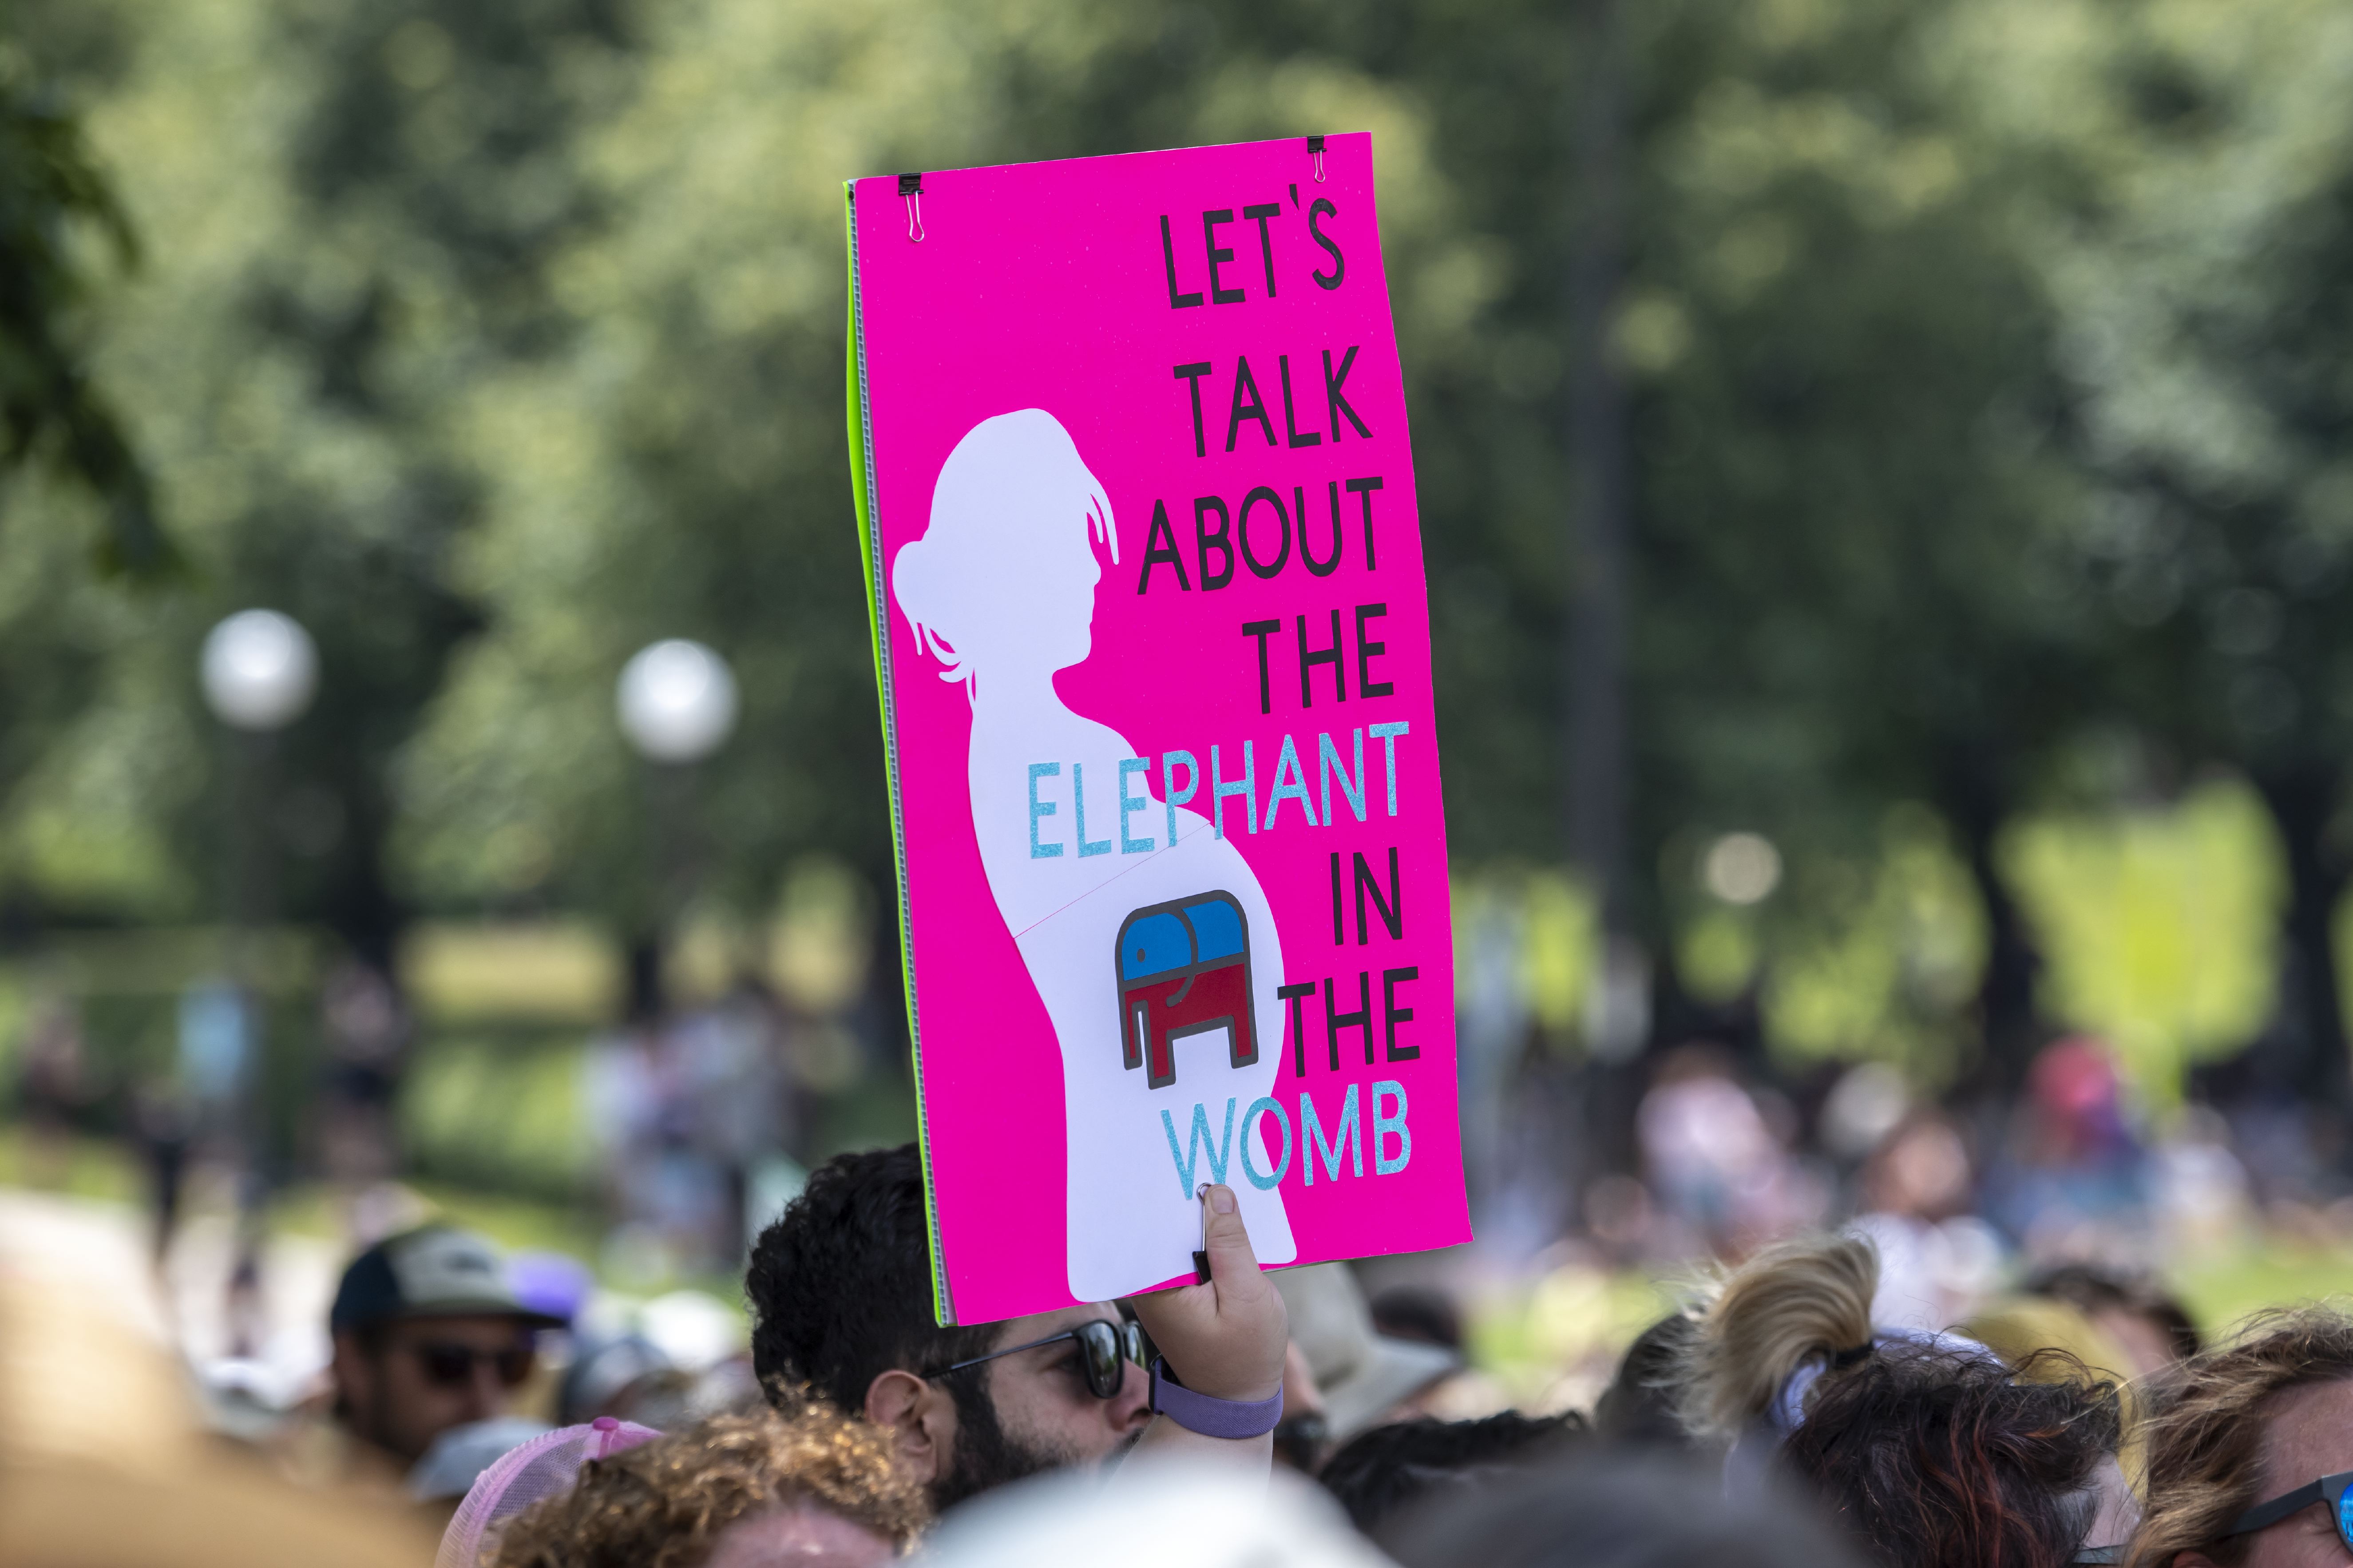 A protest sign with an outline of a pregnant person with a Republican elephant symbol over its midsection and the words “Let’s talk about the elephant in the womb.”